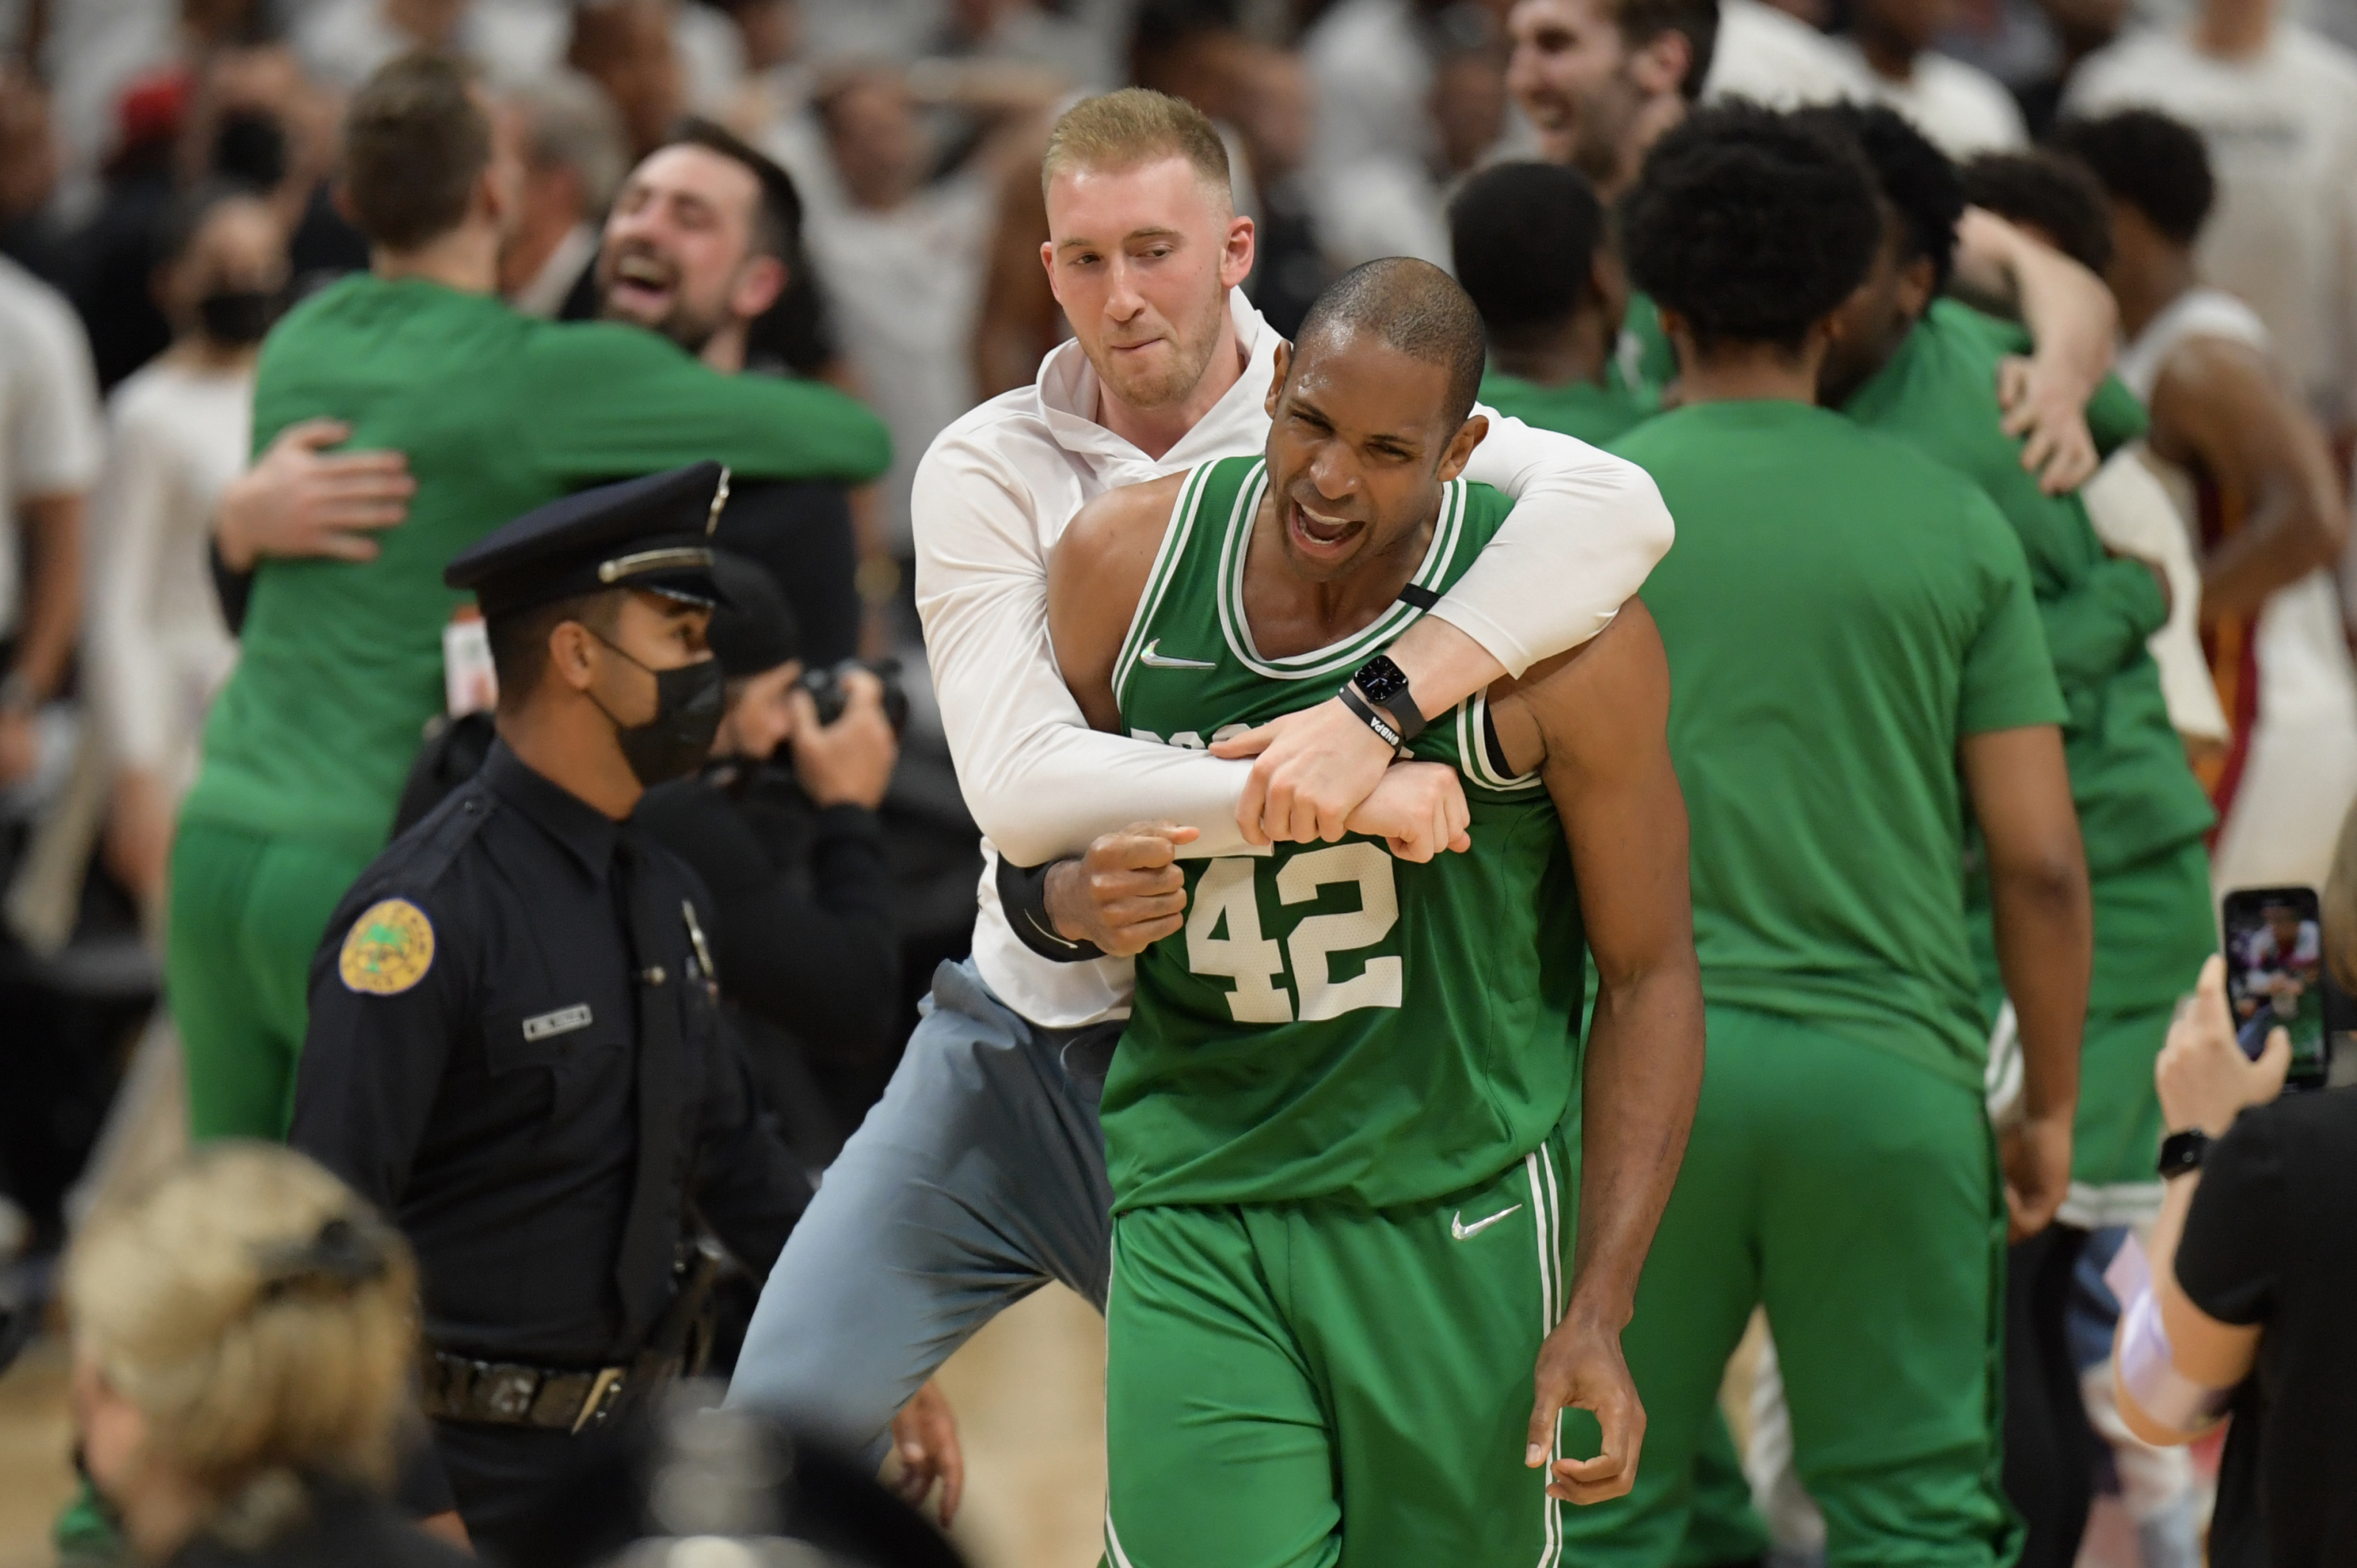 Al Horford has done a little bit of everything for the Celtics